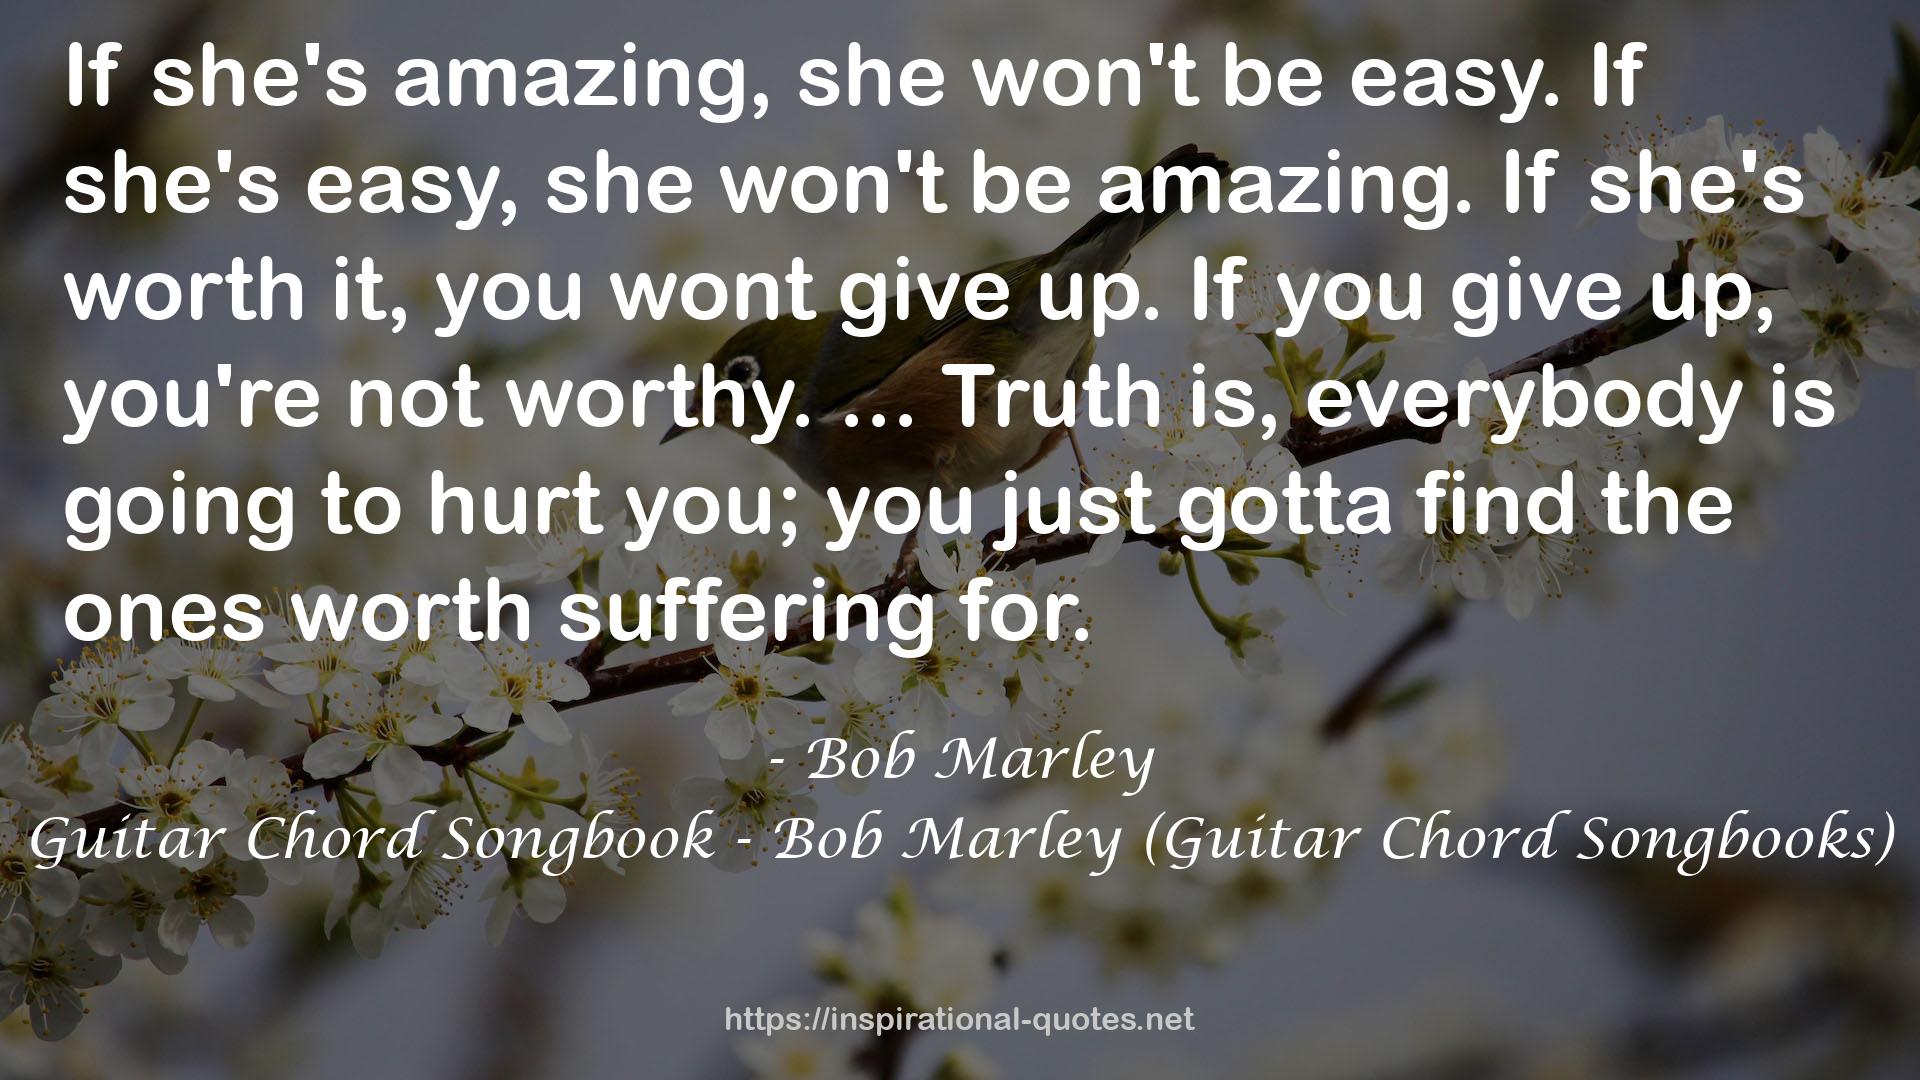 Guitar Chord Songbook - Bob Marley (Guitar Chord Songbooks) QUOTES